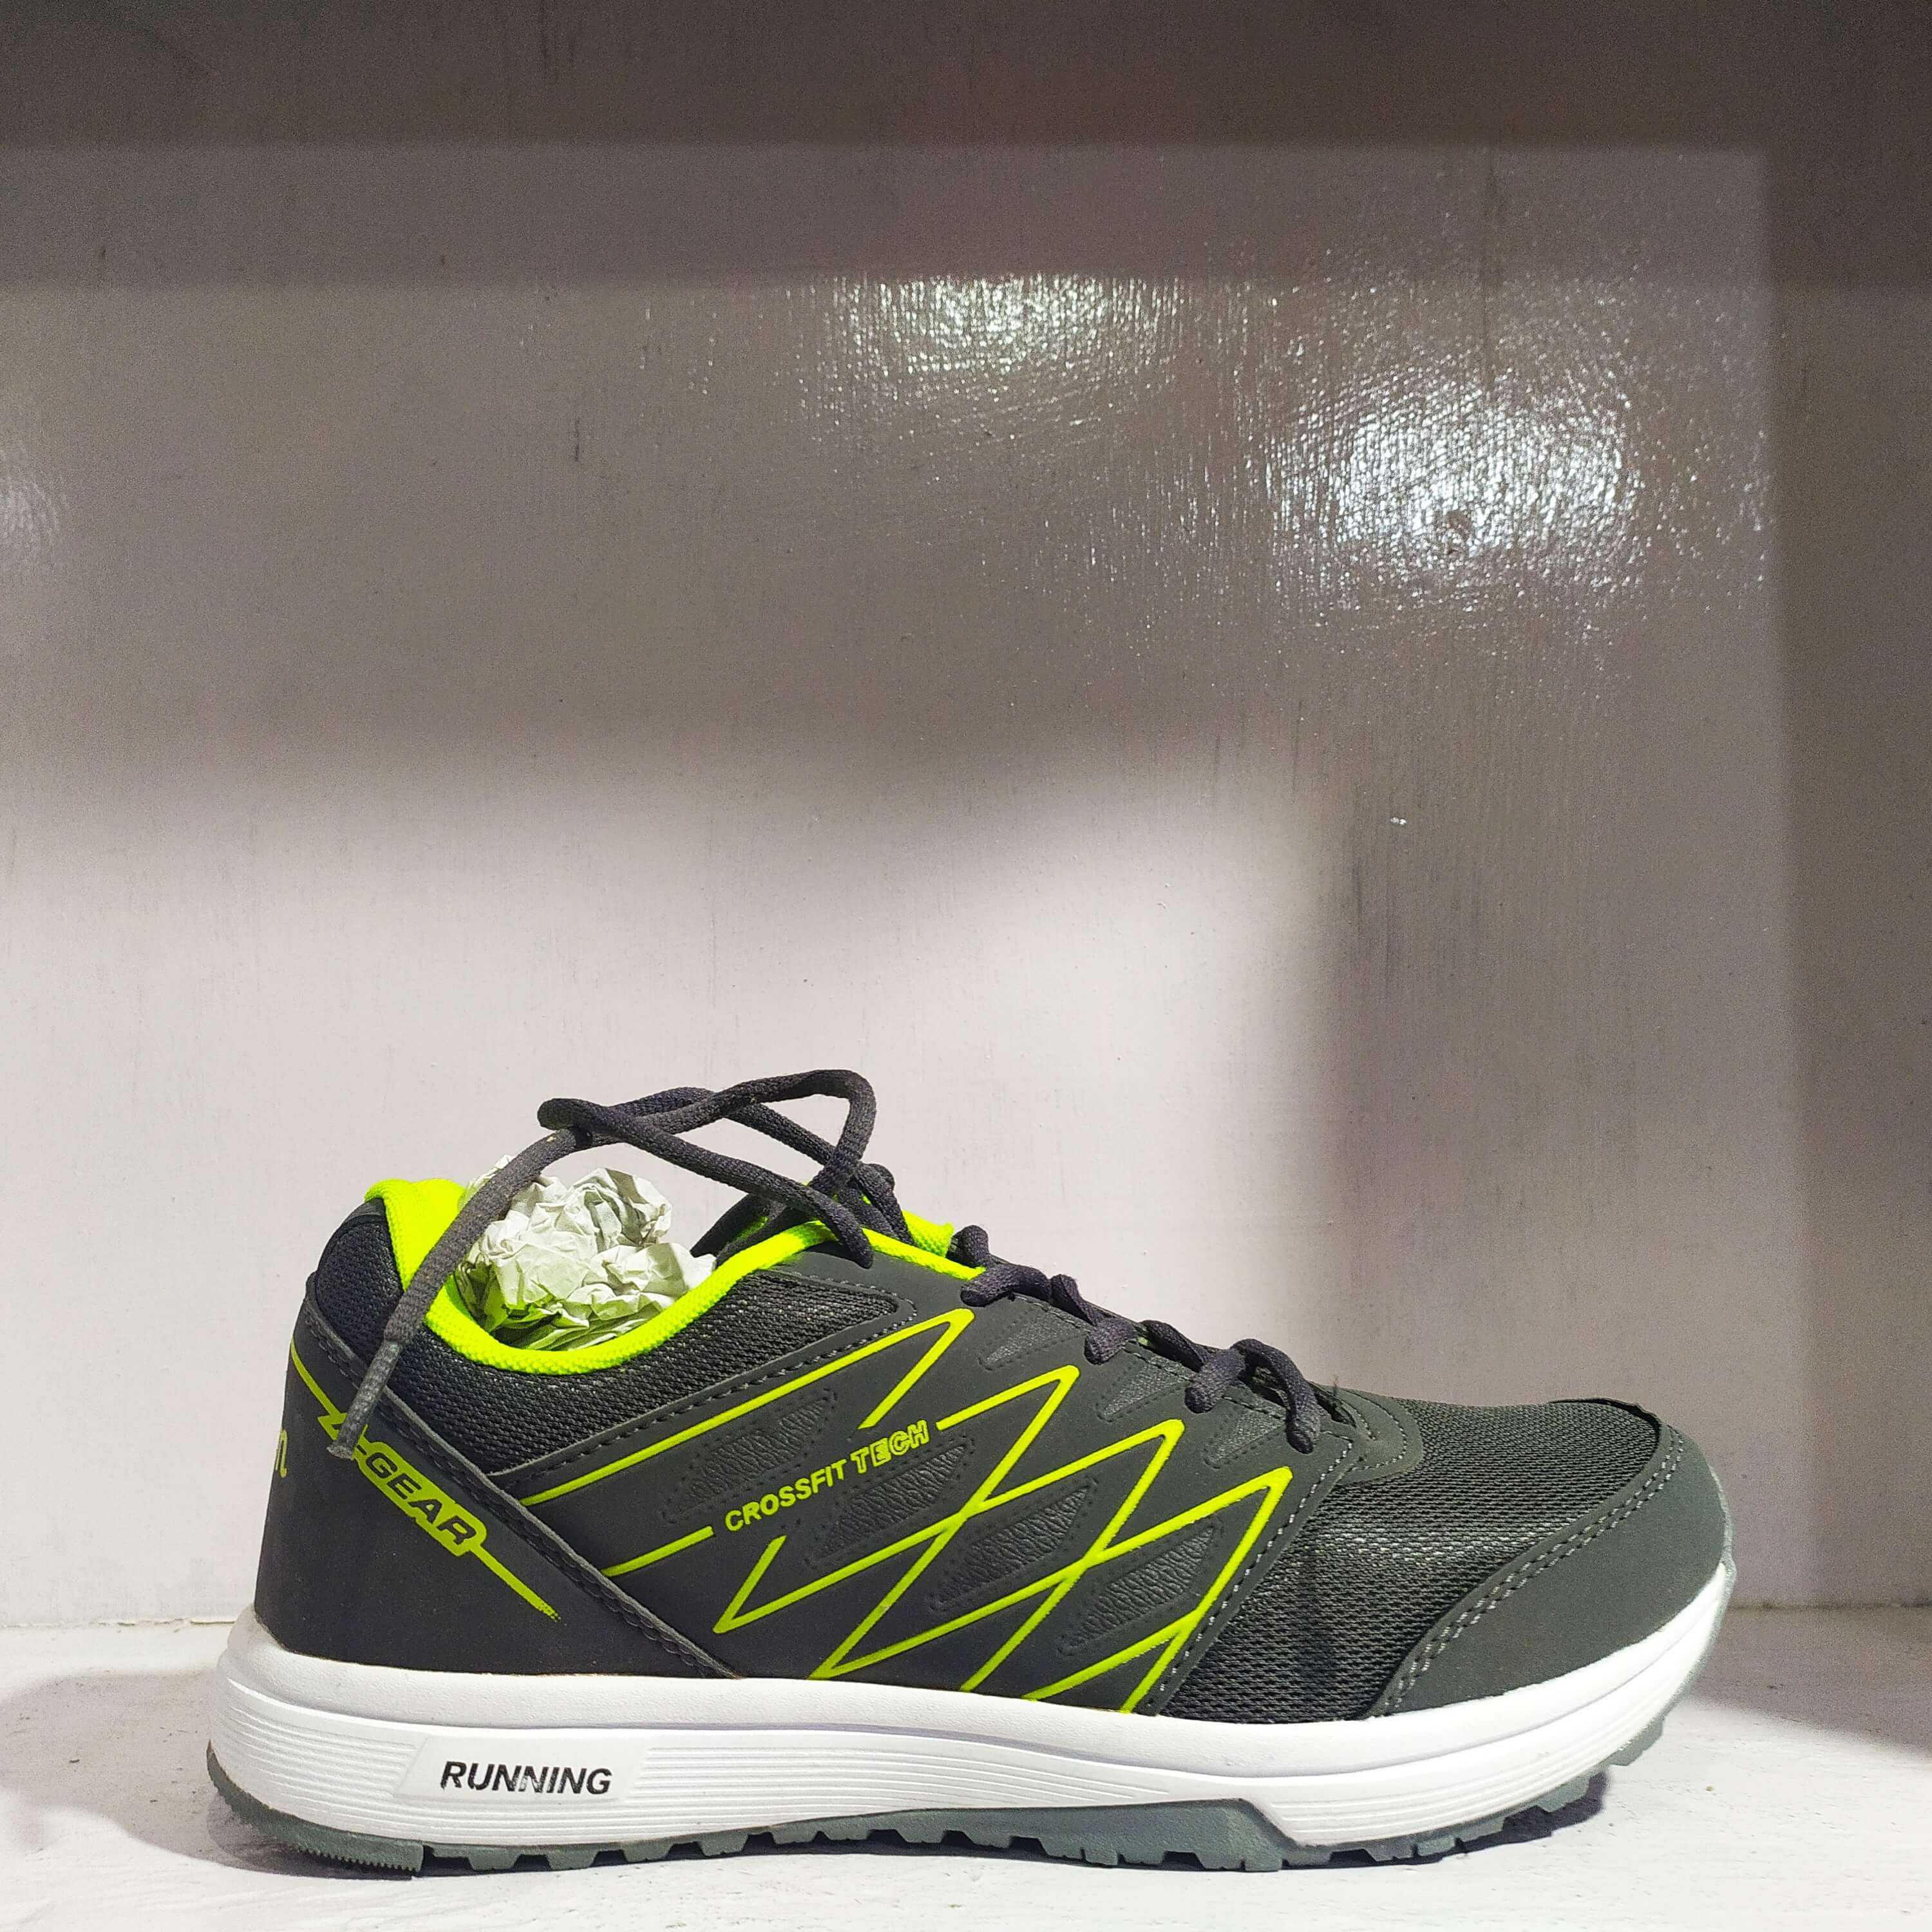 A Gear Action Sports Shoes for Running - StyloSale